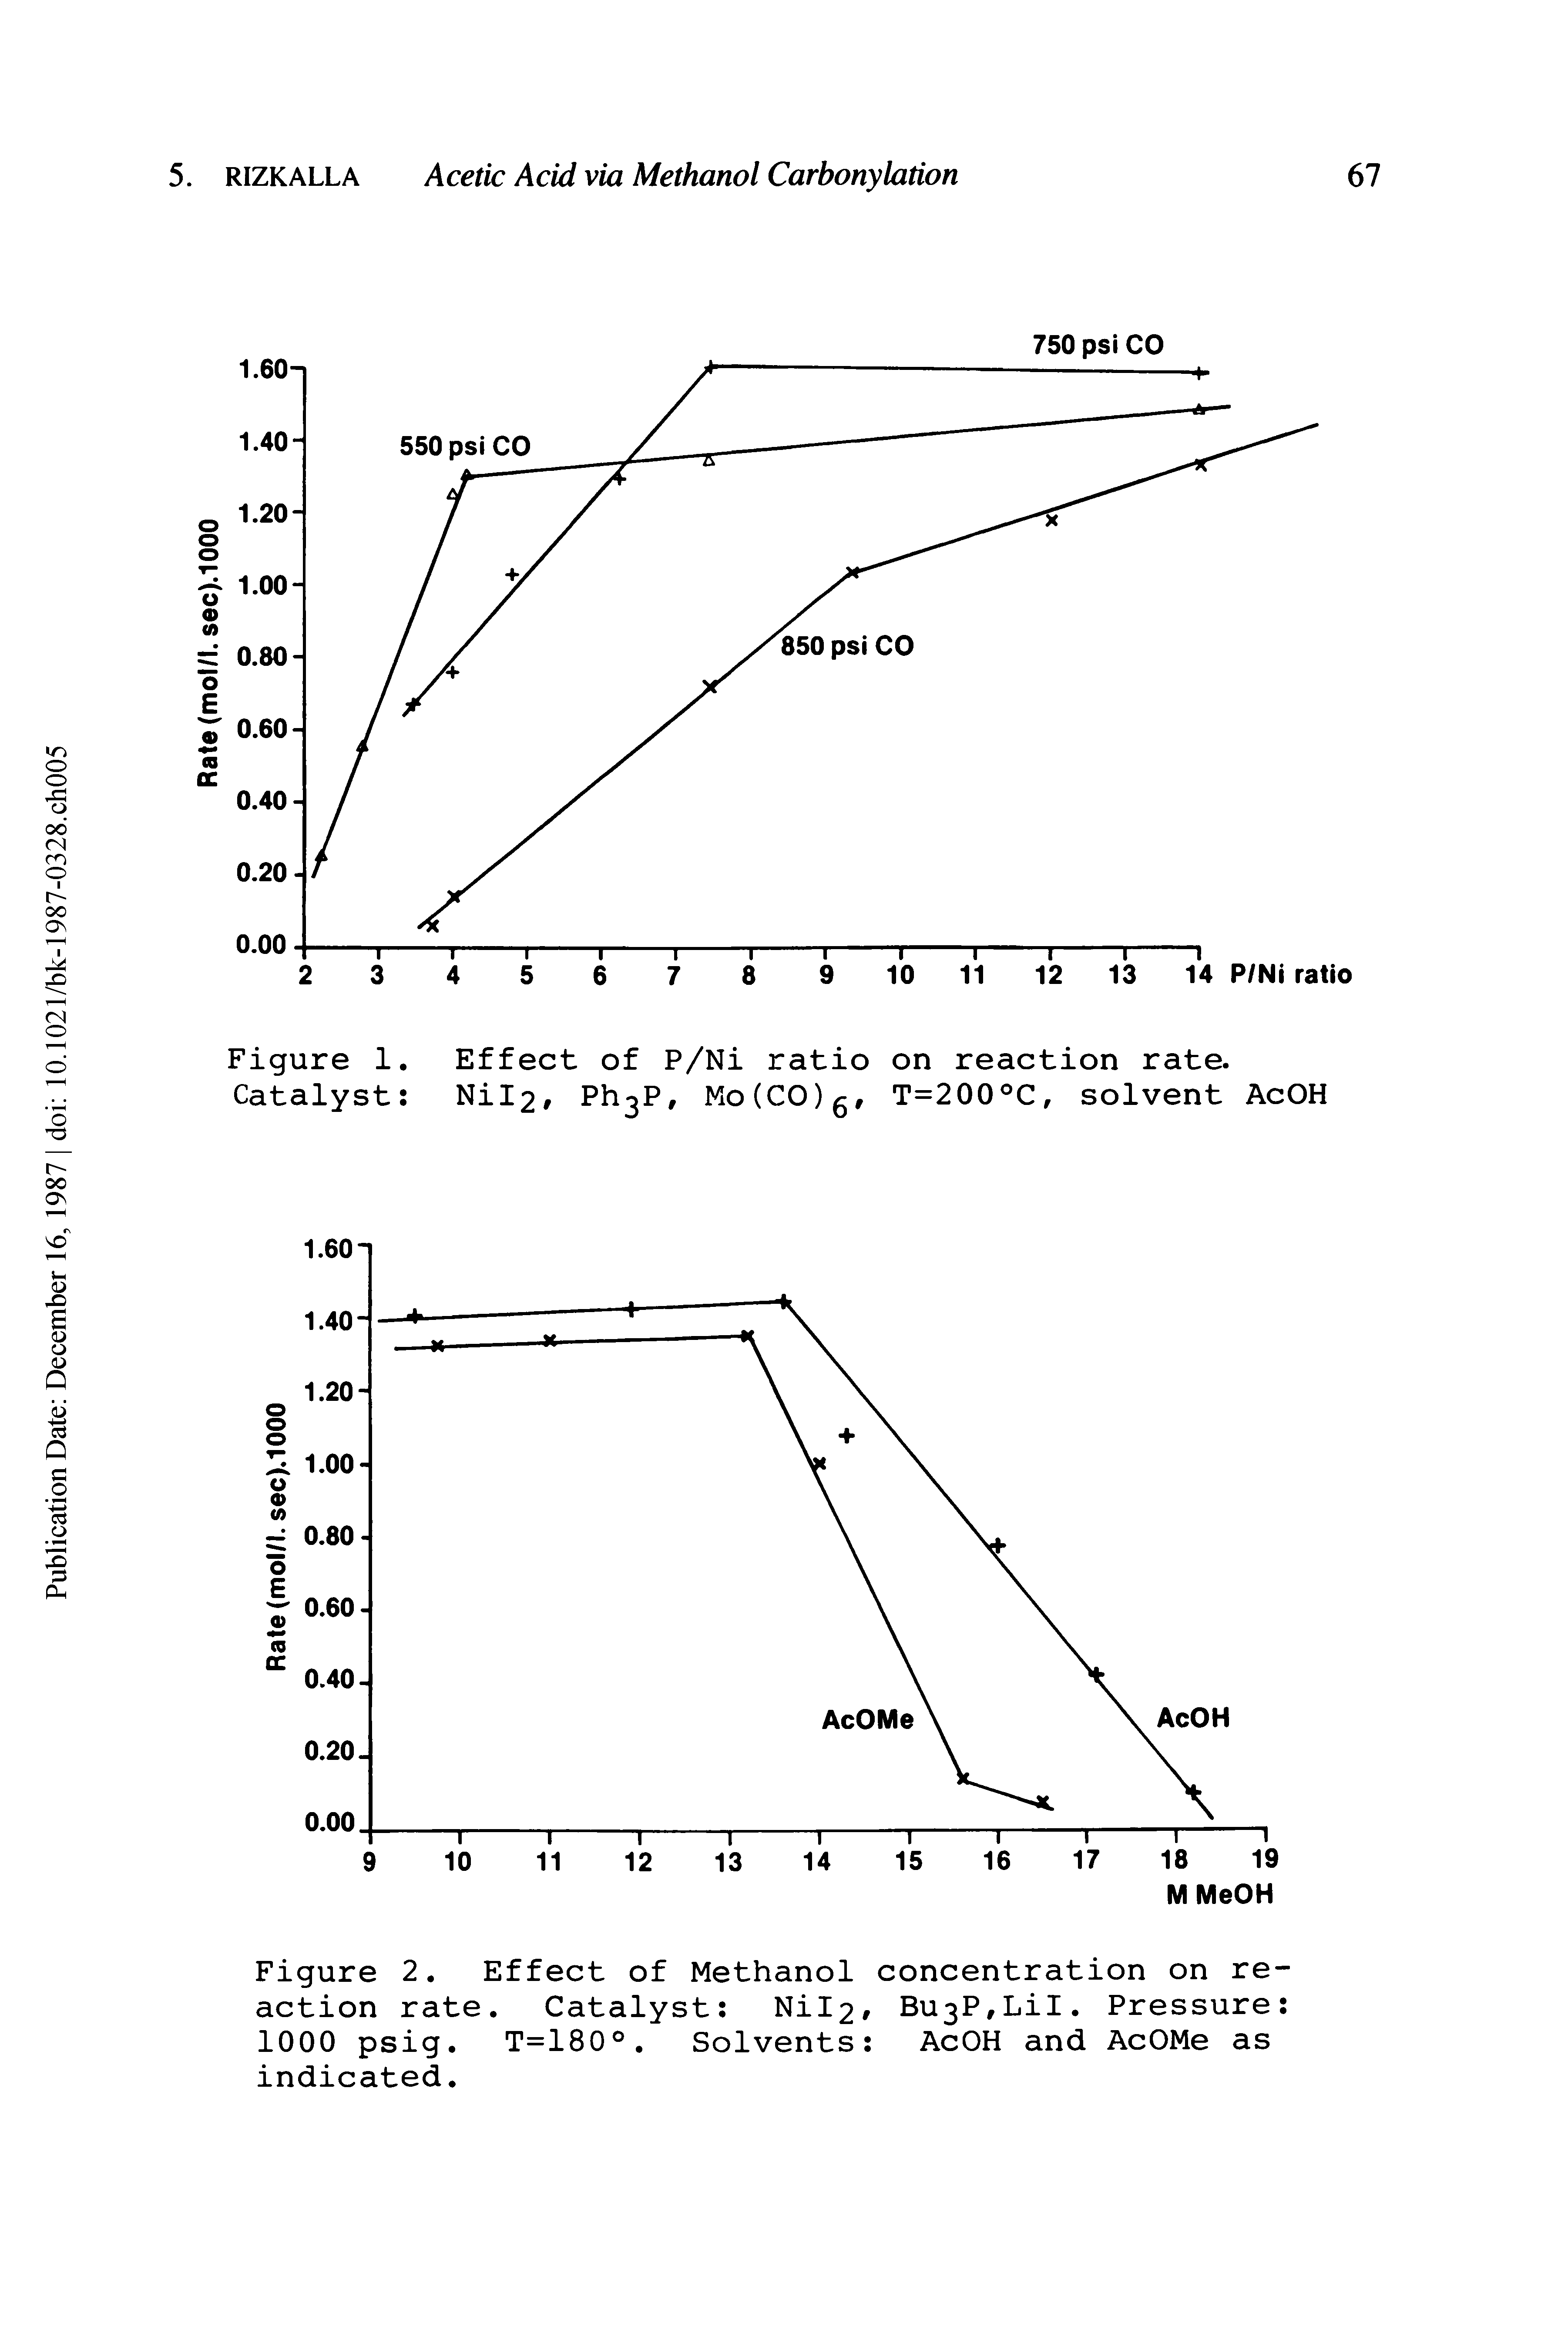 Figure 2. Effect of Methanol concentration on reaction rate. Catalyst Nil2 Bu3P,LiI. Pressure 1000 psig. T=180°, Solvents AcOH and AcOMe as indicated.